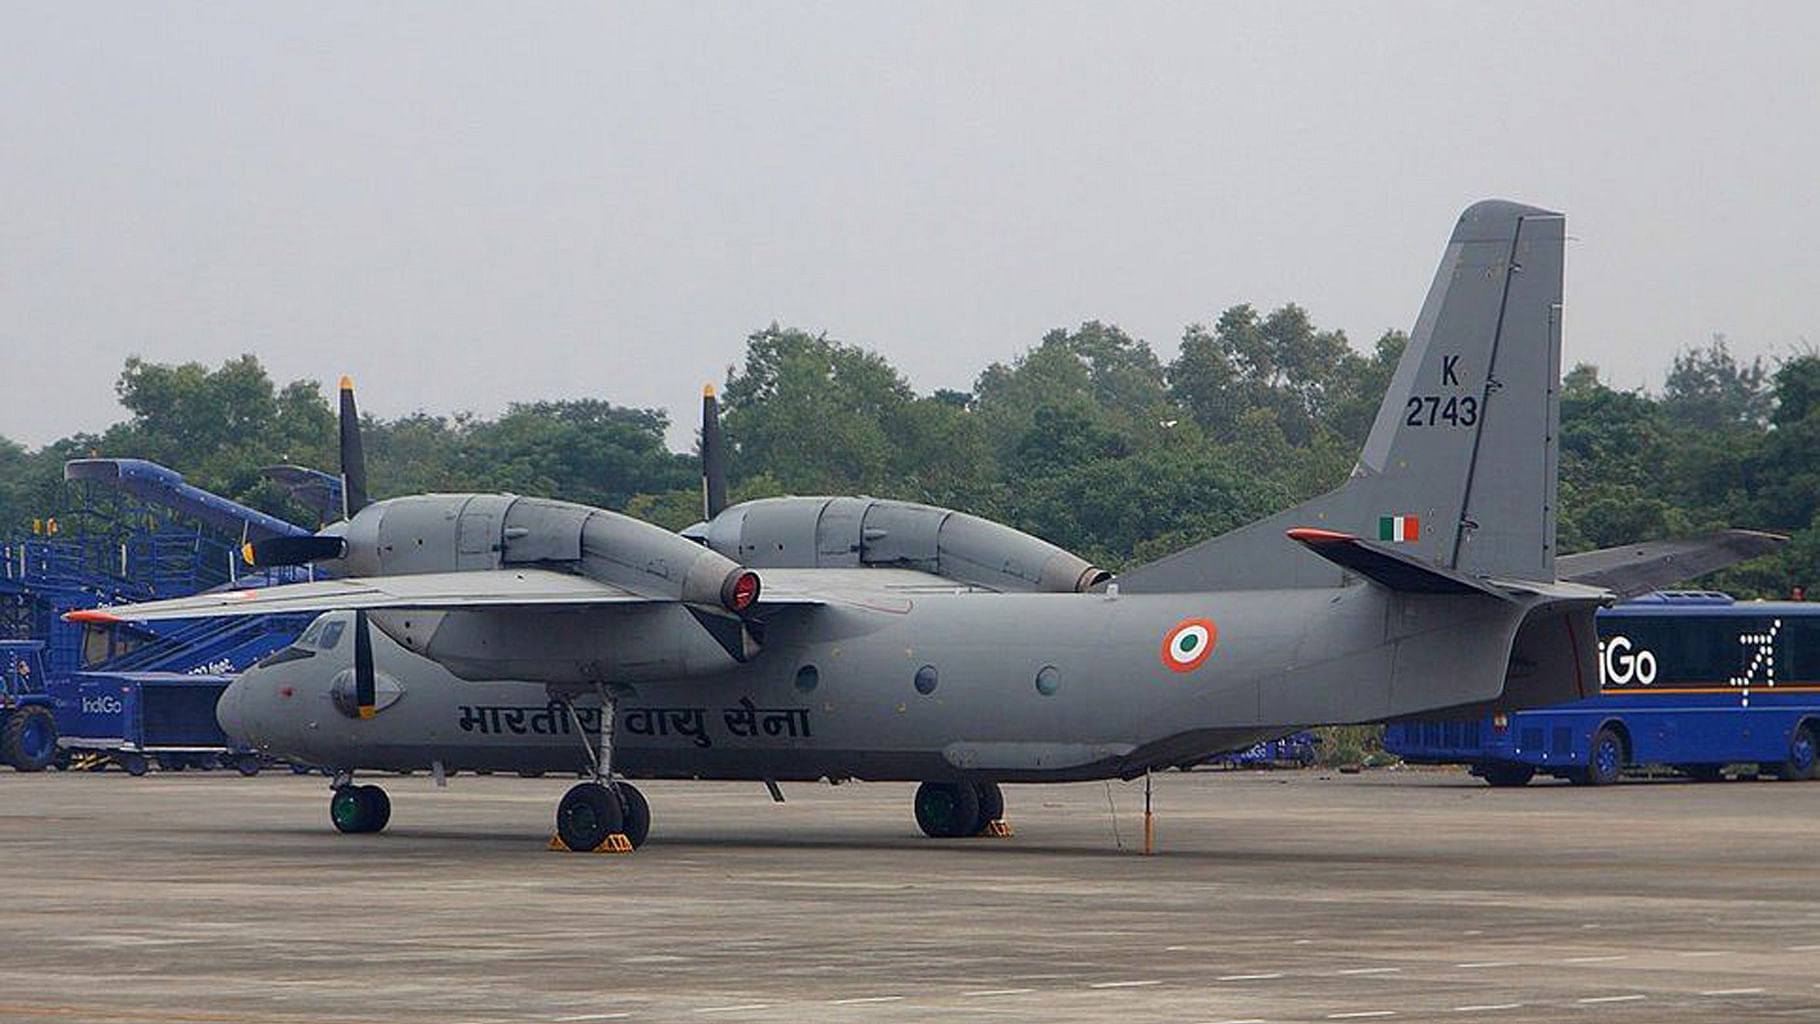 File photo of the same Indian Air Force AN-32 (K-2743) that went missing over the Bay of Bengal. (Photo Courtesy: Twitter/<a href="https://twitter.com/ShivAroor">@ShivAroor</a>) 